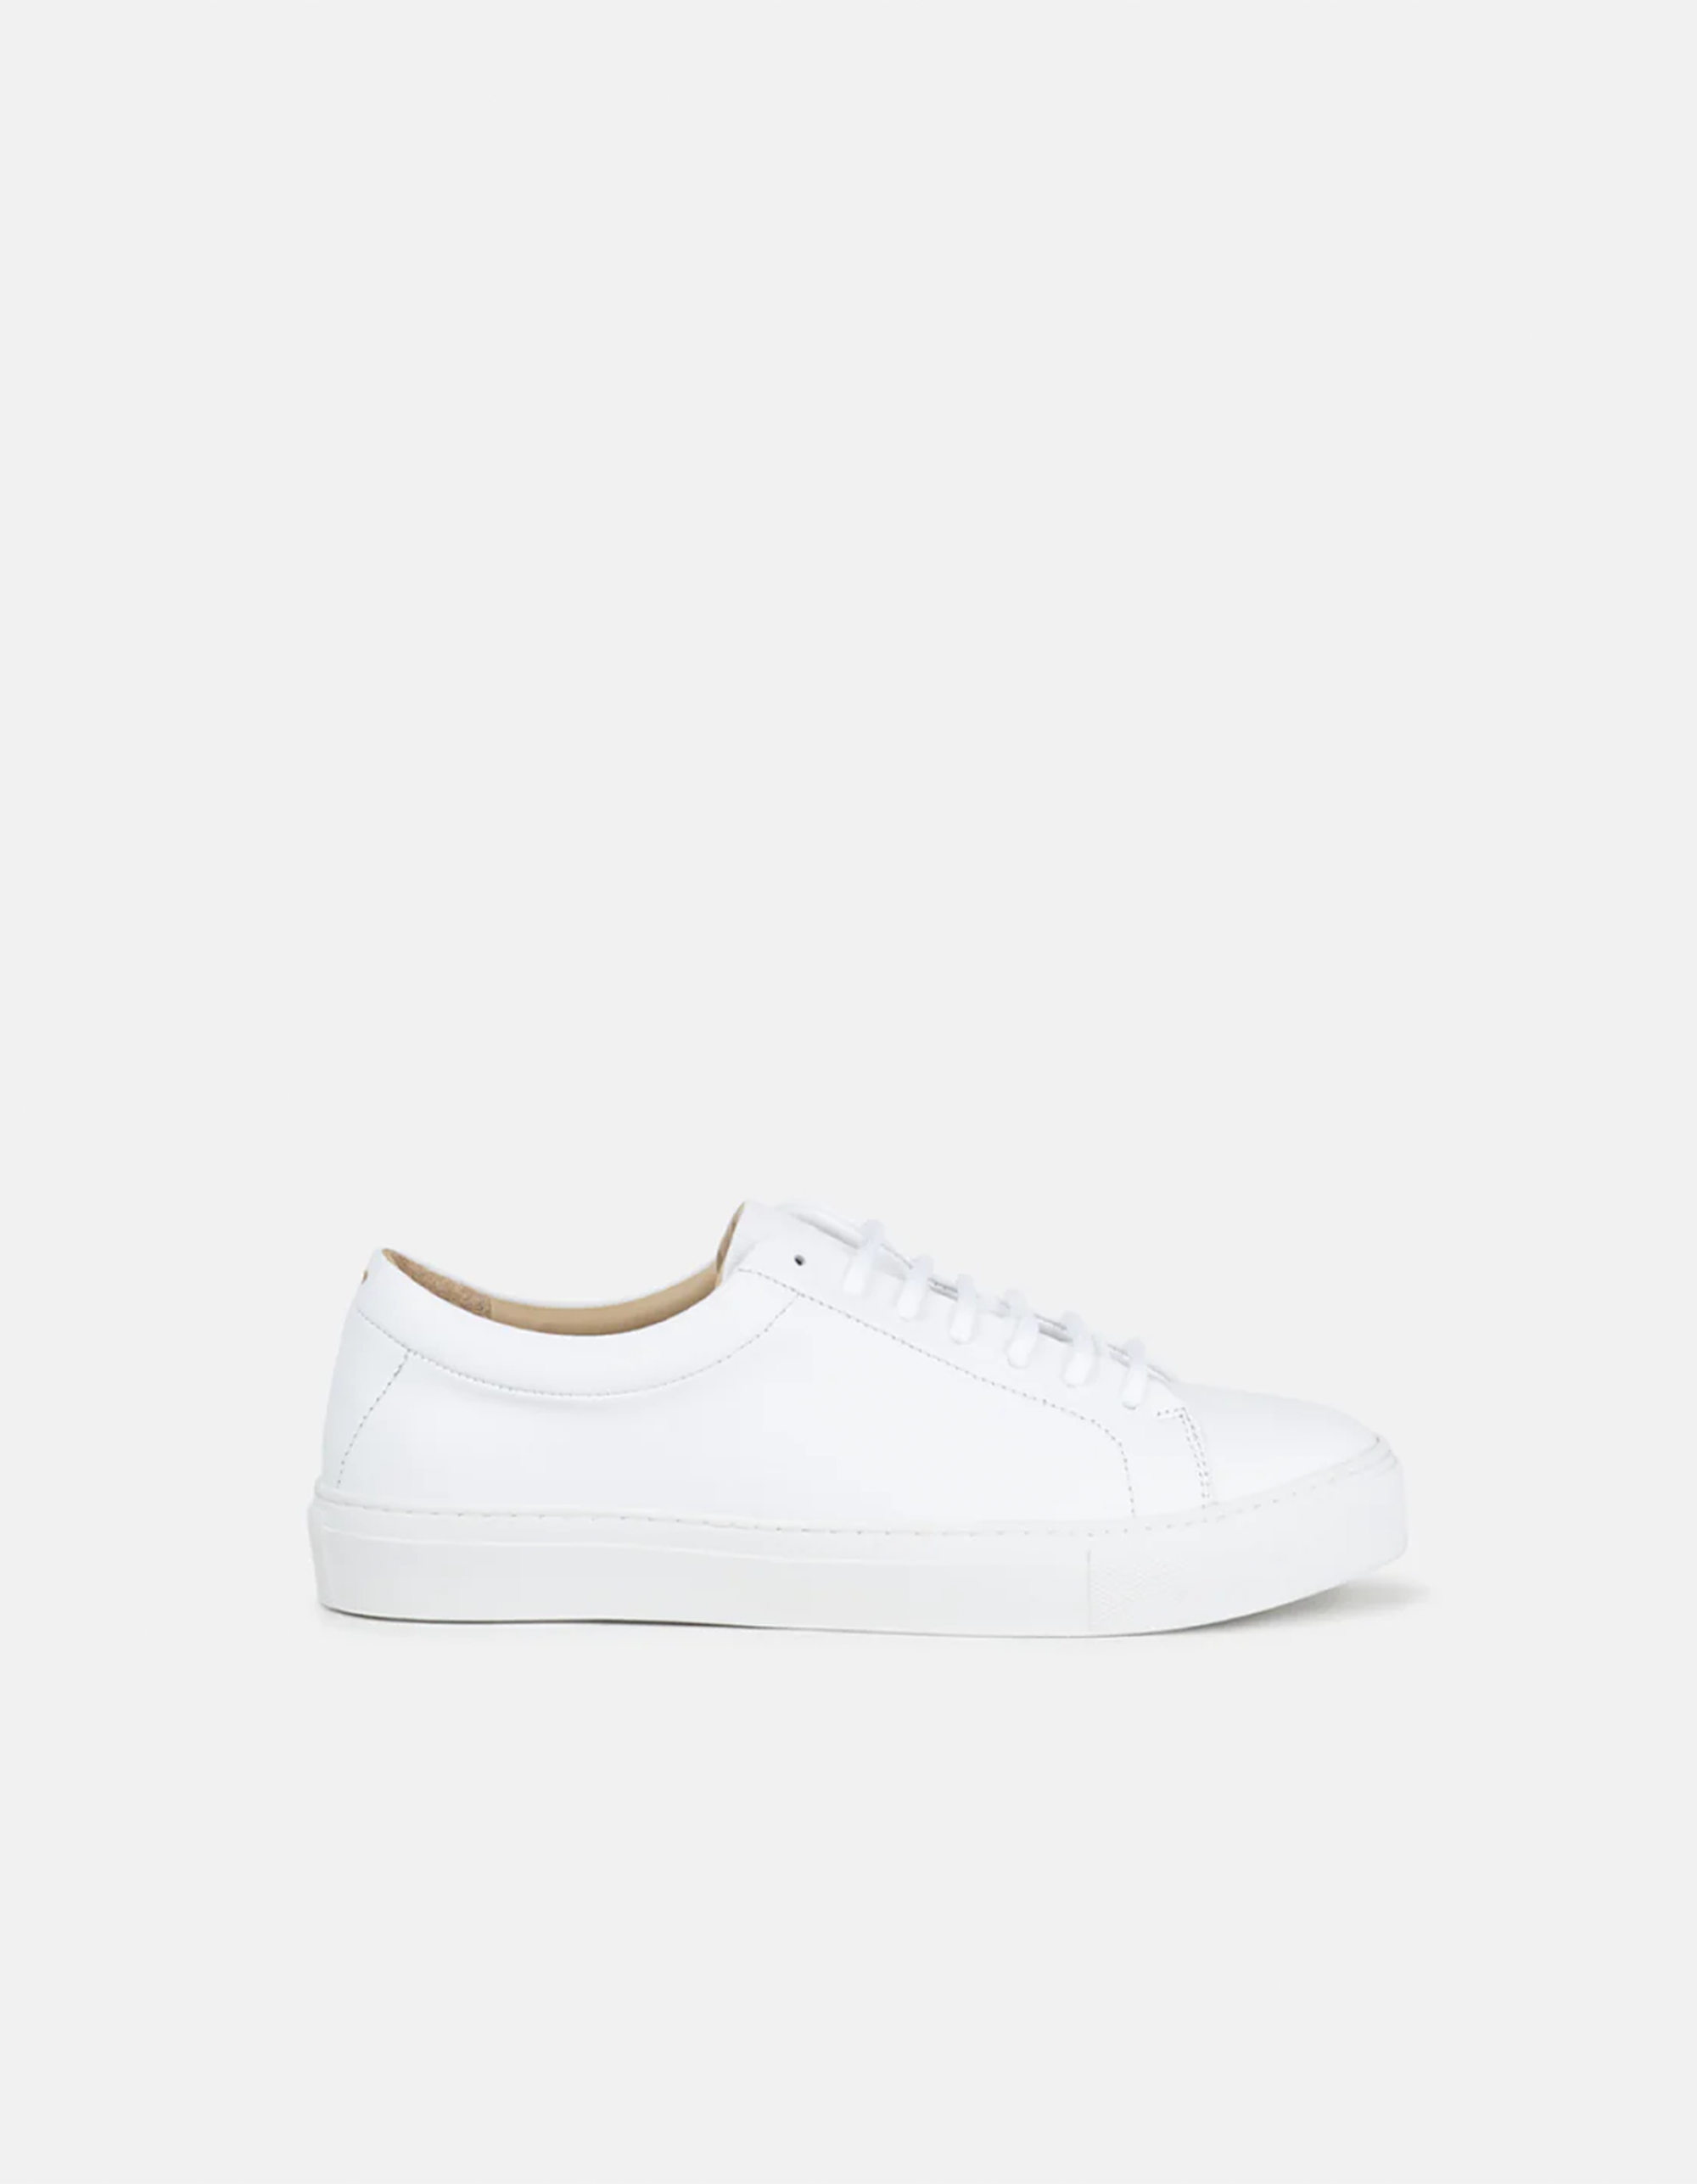 <img class='new_mark_img1' src='https://img.shop-pro.jp/img/new/icons8.gif' style='border:none;display:inline;margin:0px;padding:0px;width:auto;' />ROYAL REPUBLIQSPARTACUS LEATHER SNEAKERS 2col